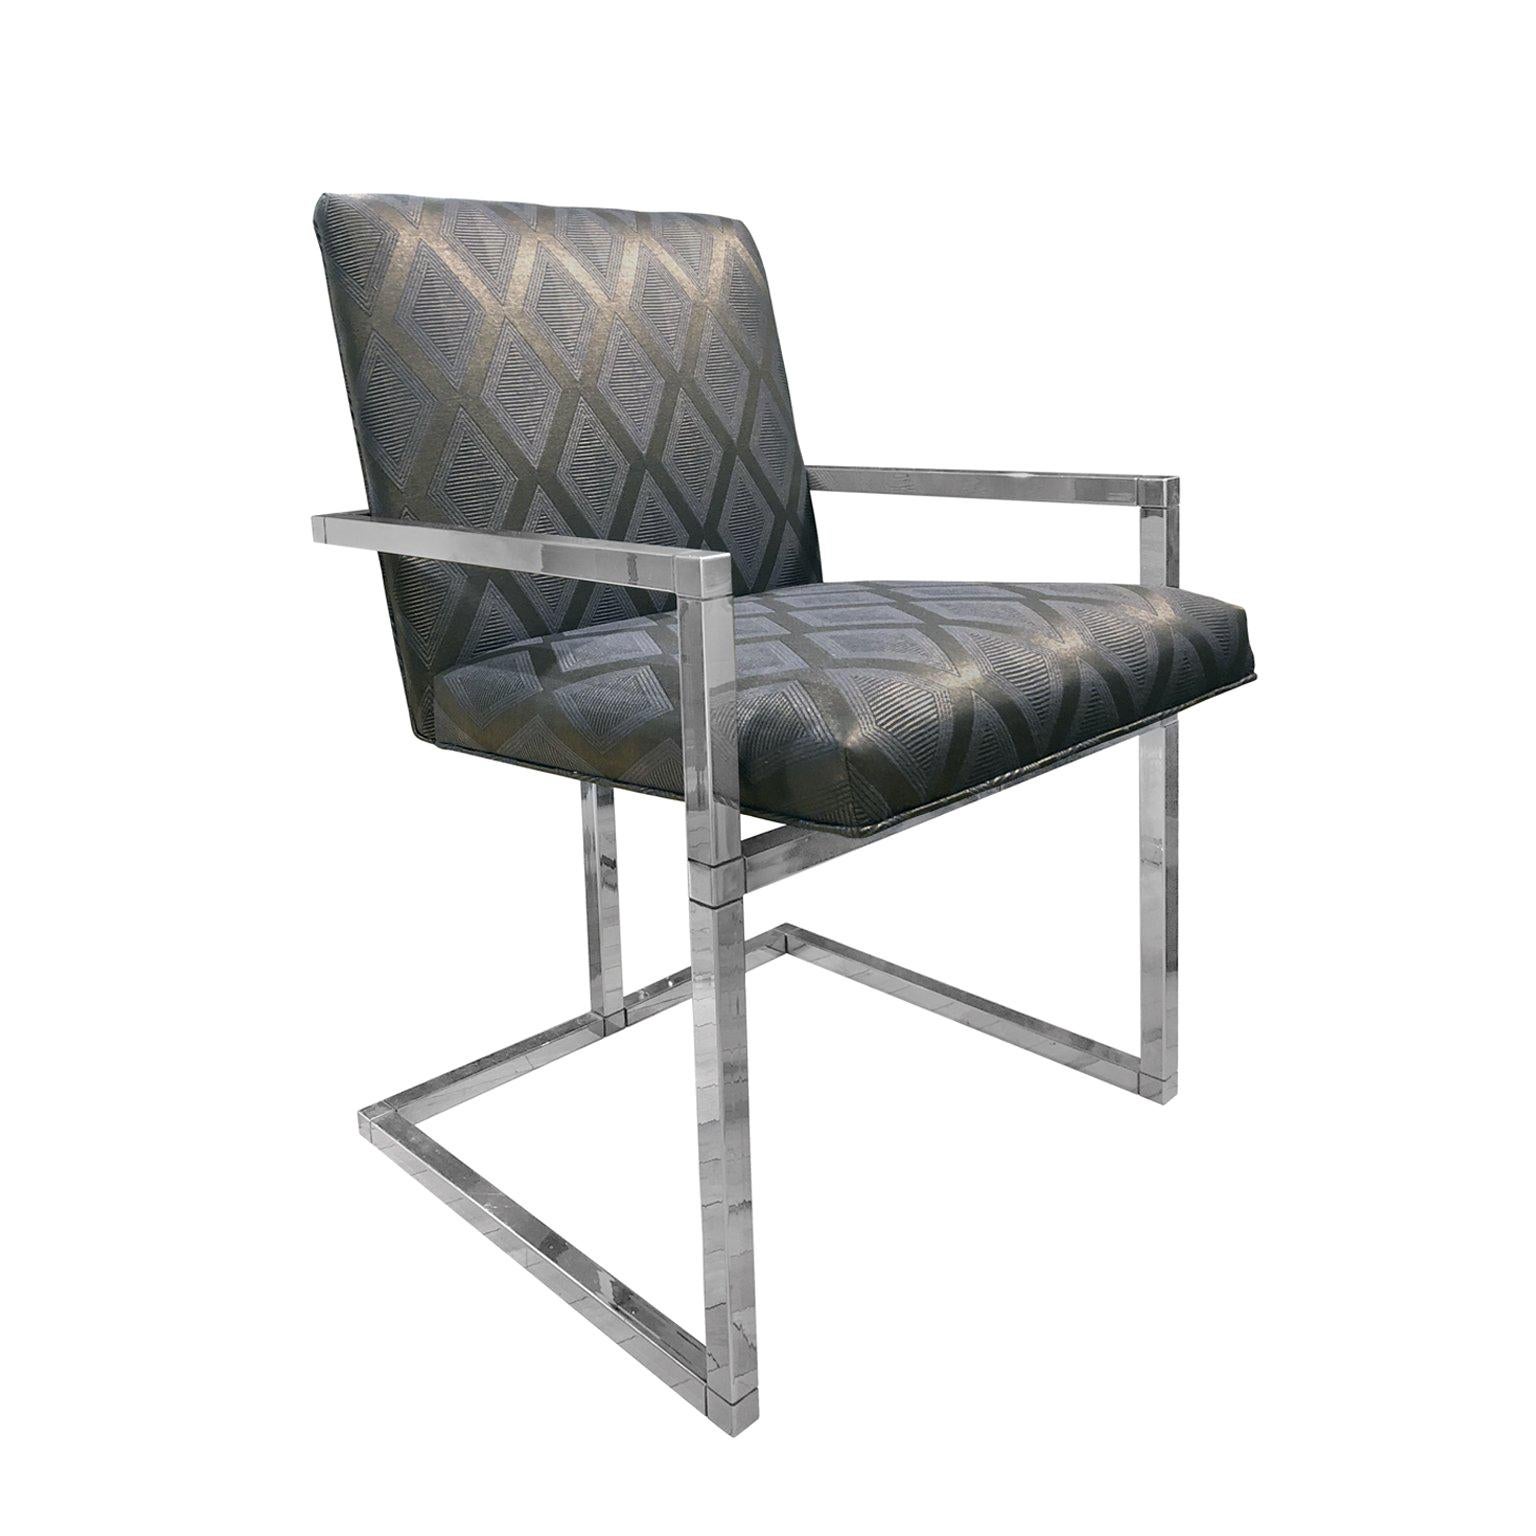 1970s Chrome Frame Dining Chair with Grey and Midnight Blue Upholstery For Sale